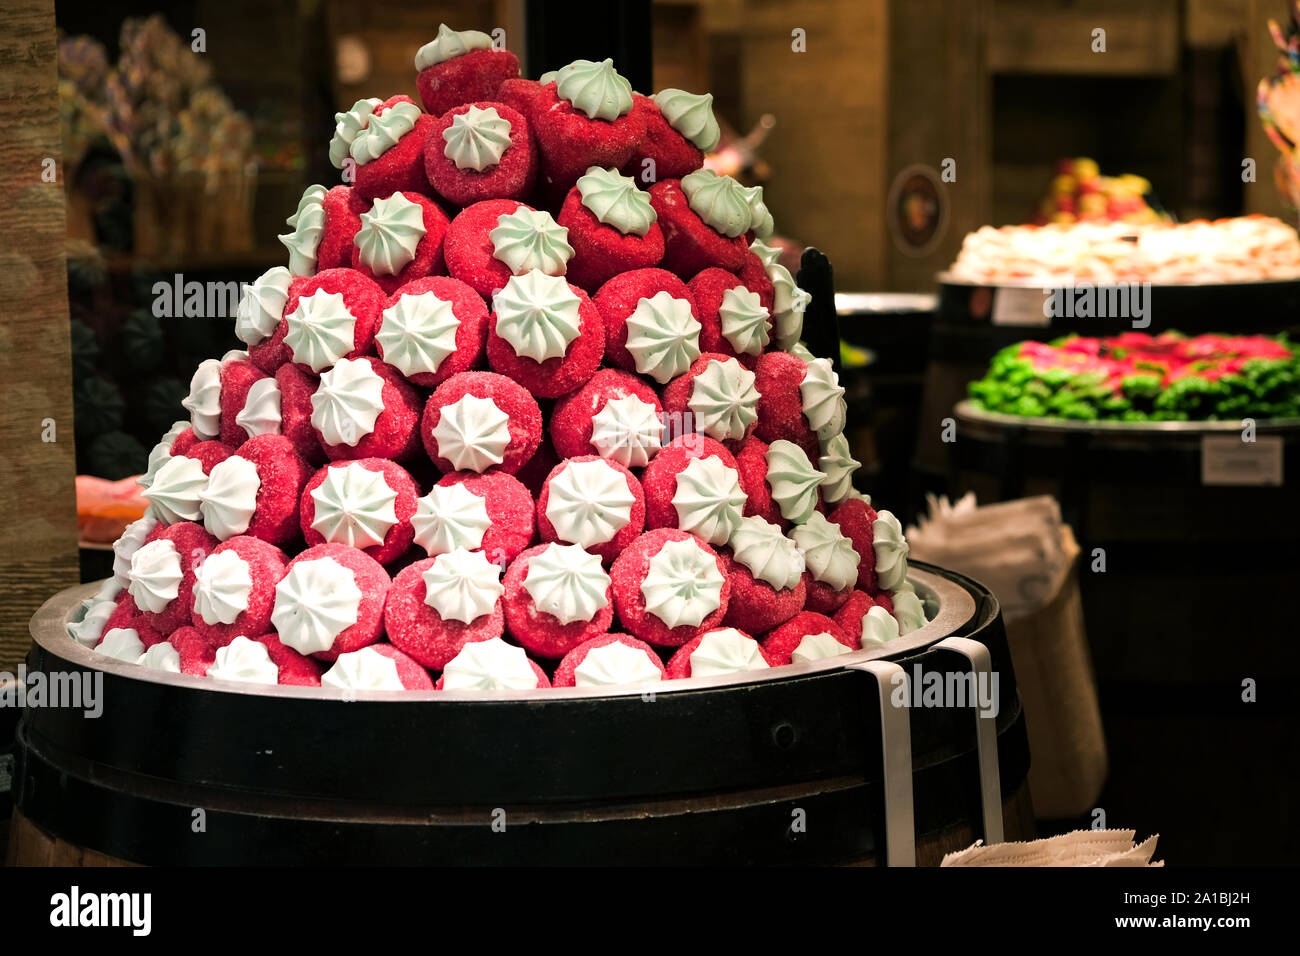 A brightly coloured confectionary display in a shop located in the Old Town of Dubrovnik. The sweets are shaped and coloured as strawberries and cream Stock Photo